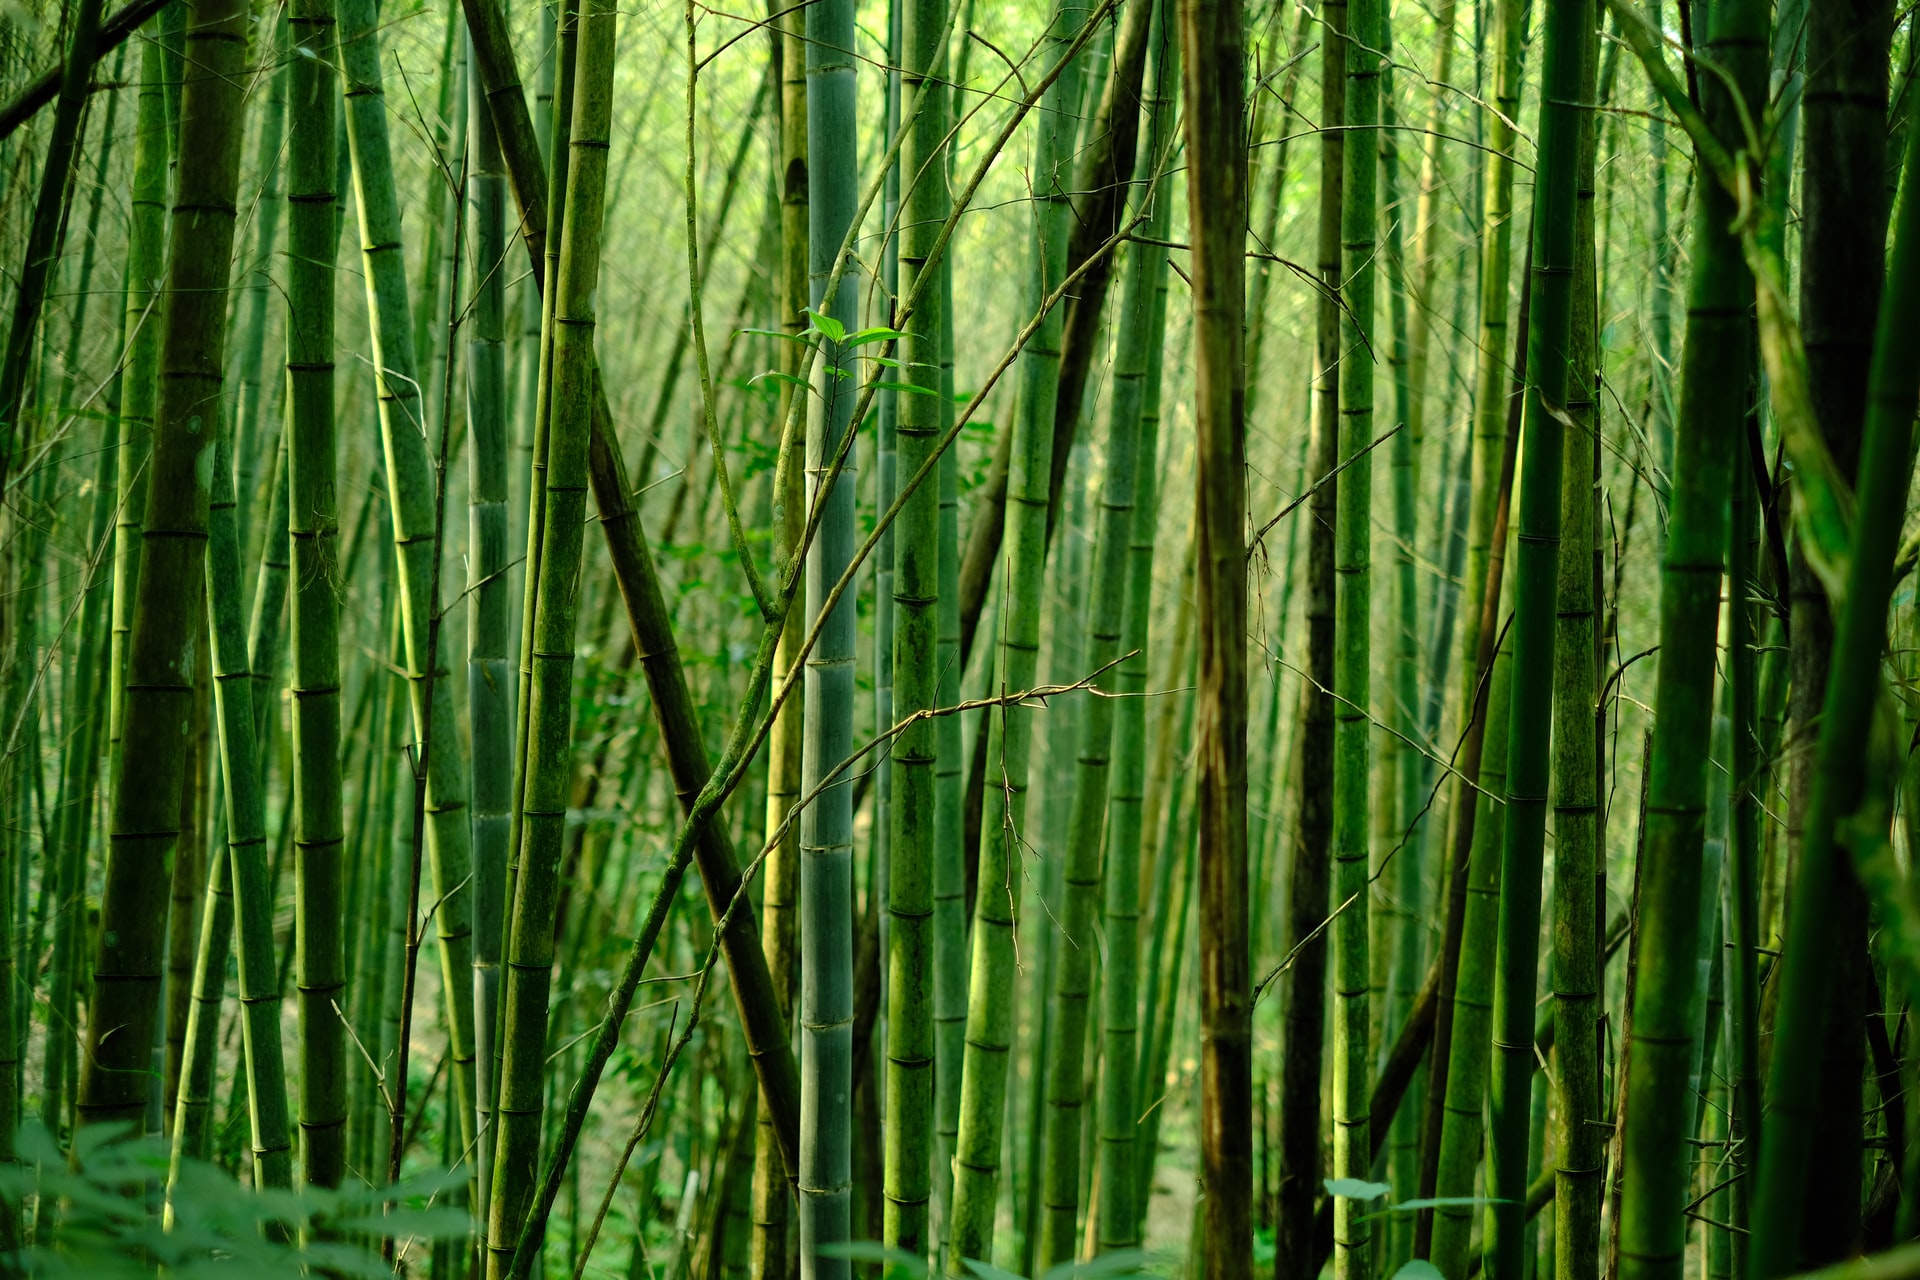 Bamboo is a great sustainable material. Photo via Unsplash